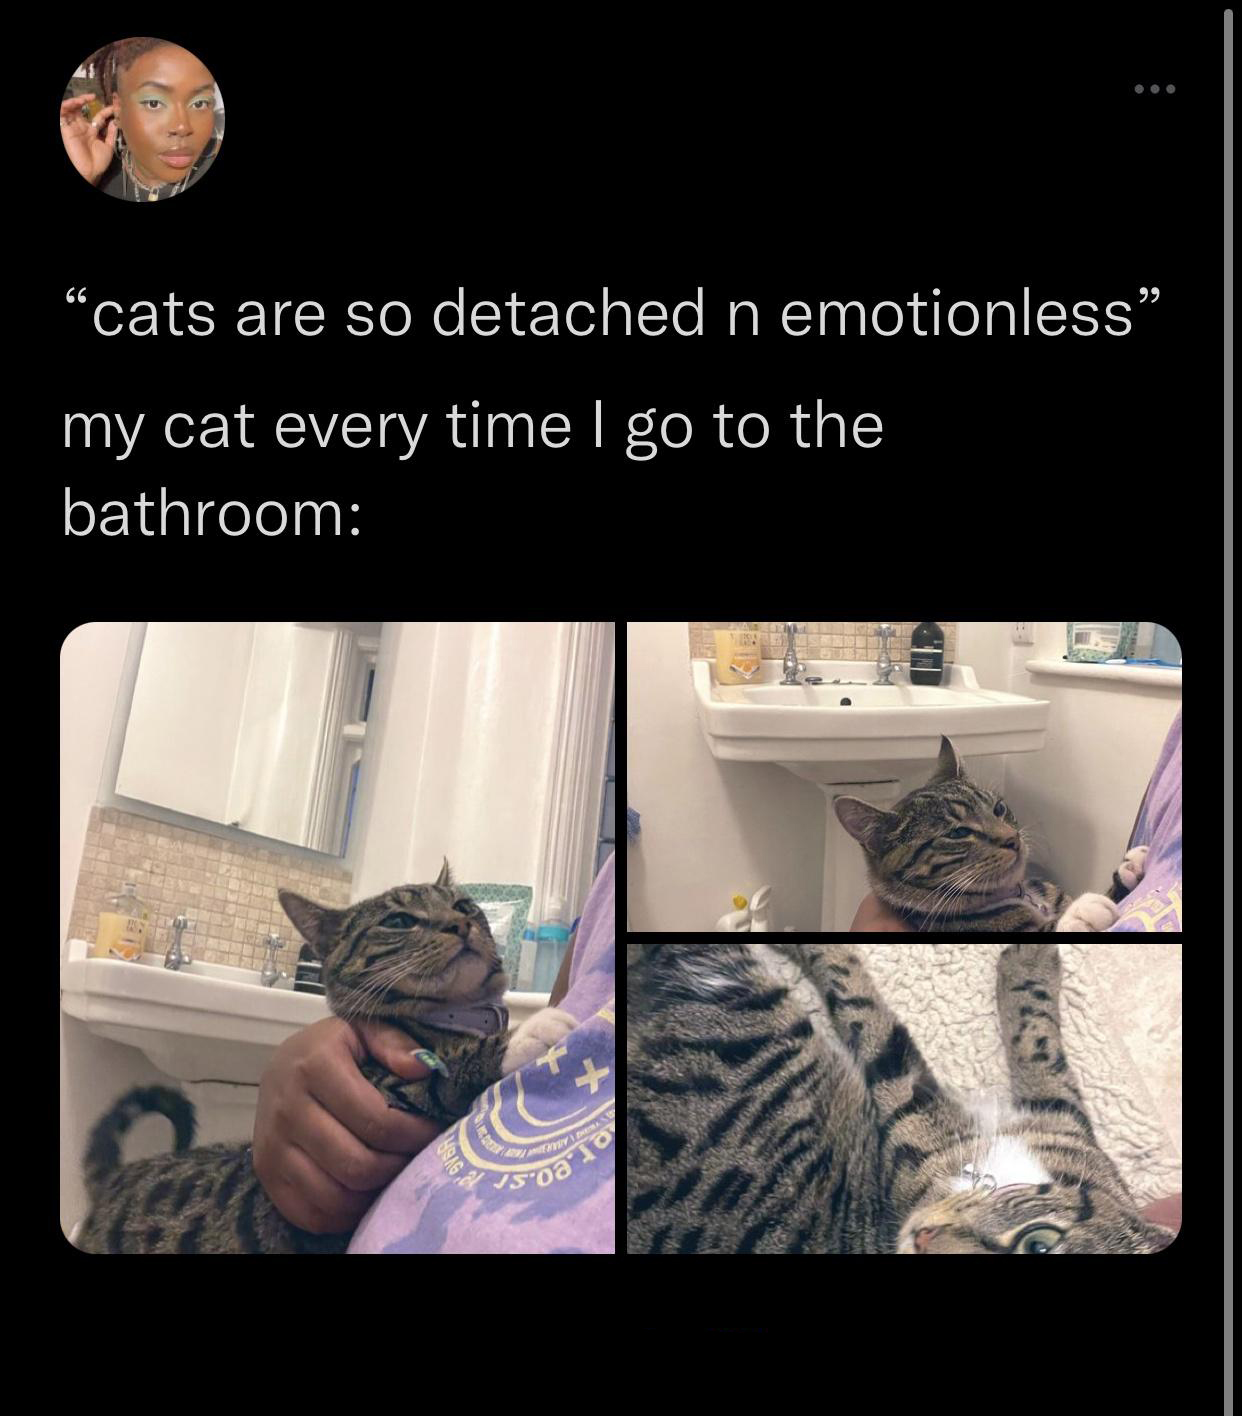 funny tweets - hot tweets - twitter memes - photo caption - "cats are so detached n emotionless my cat every time I go to the bathroom 18946,8 vsoa 10